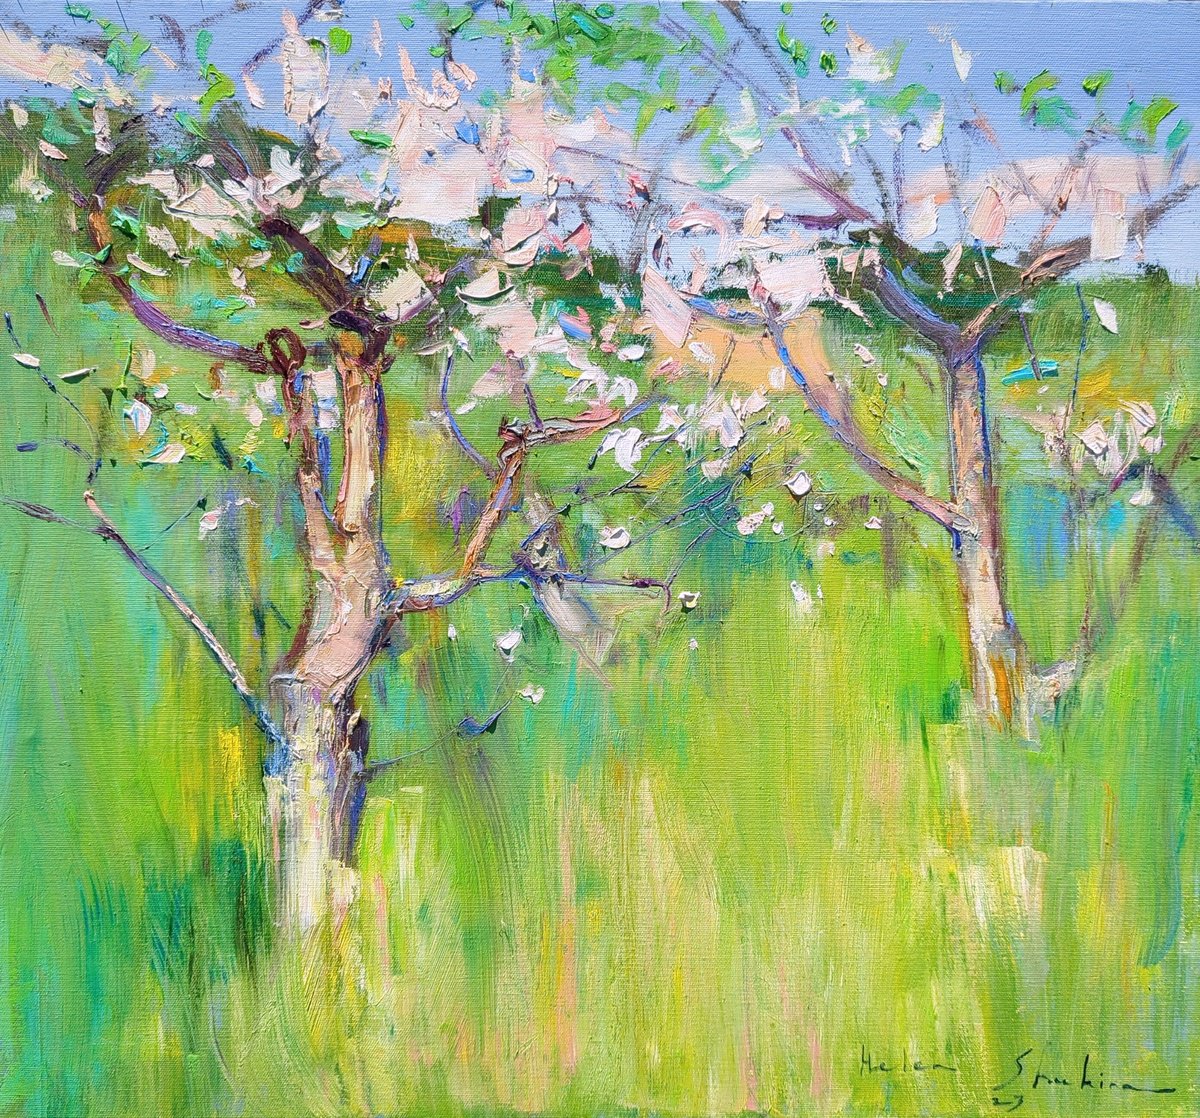 Apple tree blossoms in tall grass . 65x60 cm. Spring impressionistic oil painting . by Helen Shukina